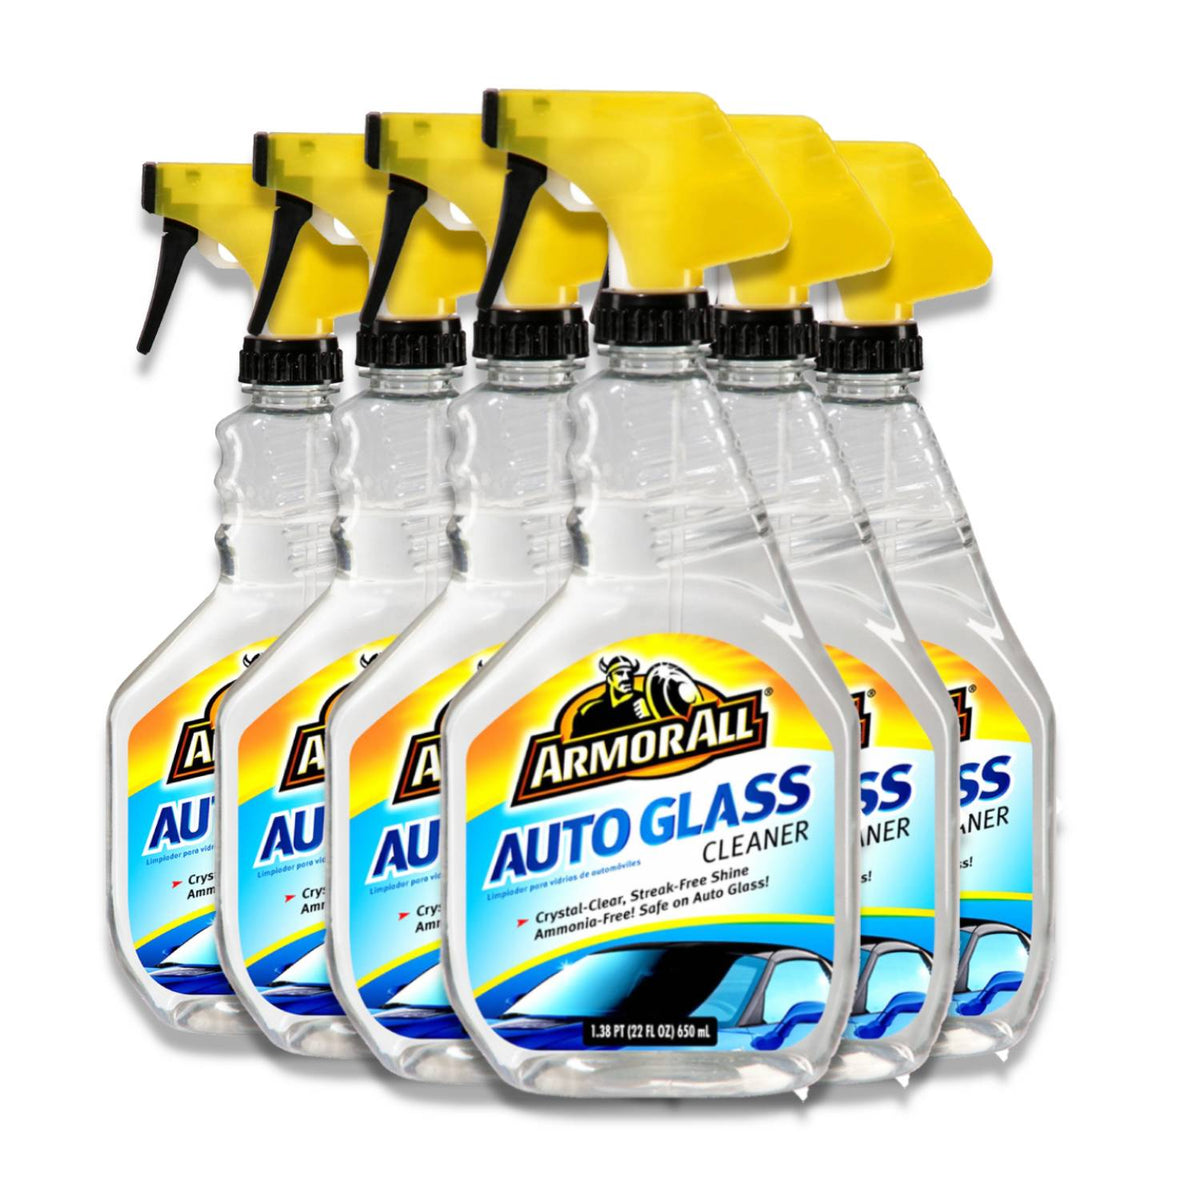 Armor All® on Instagram: More than a glass cleaner! Our Auto